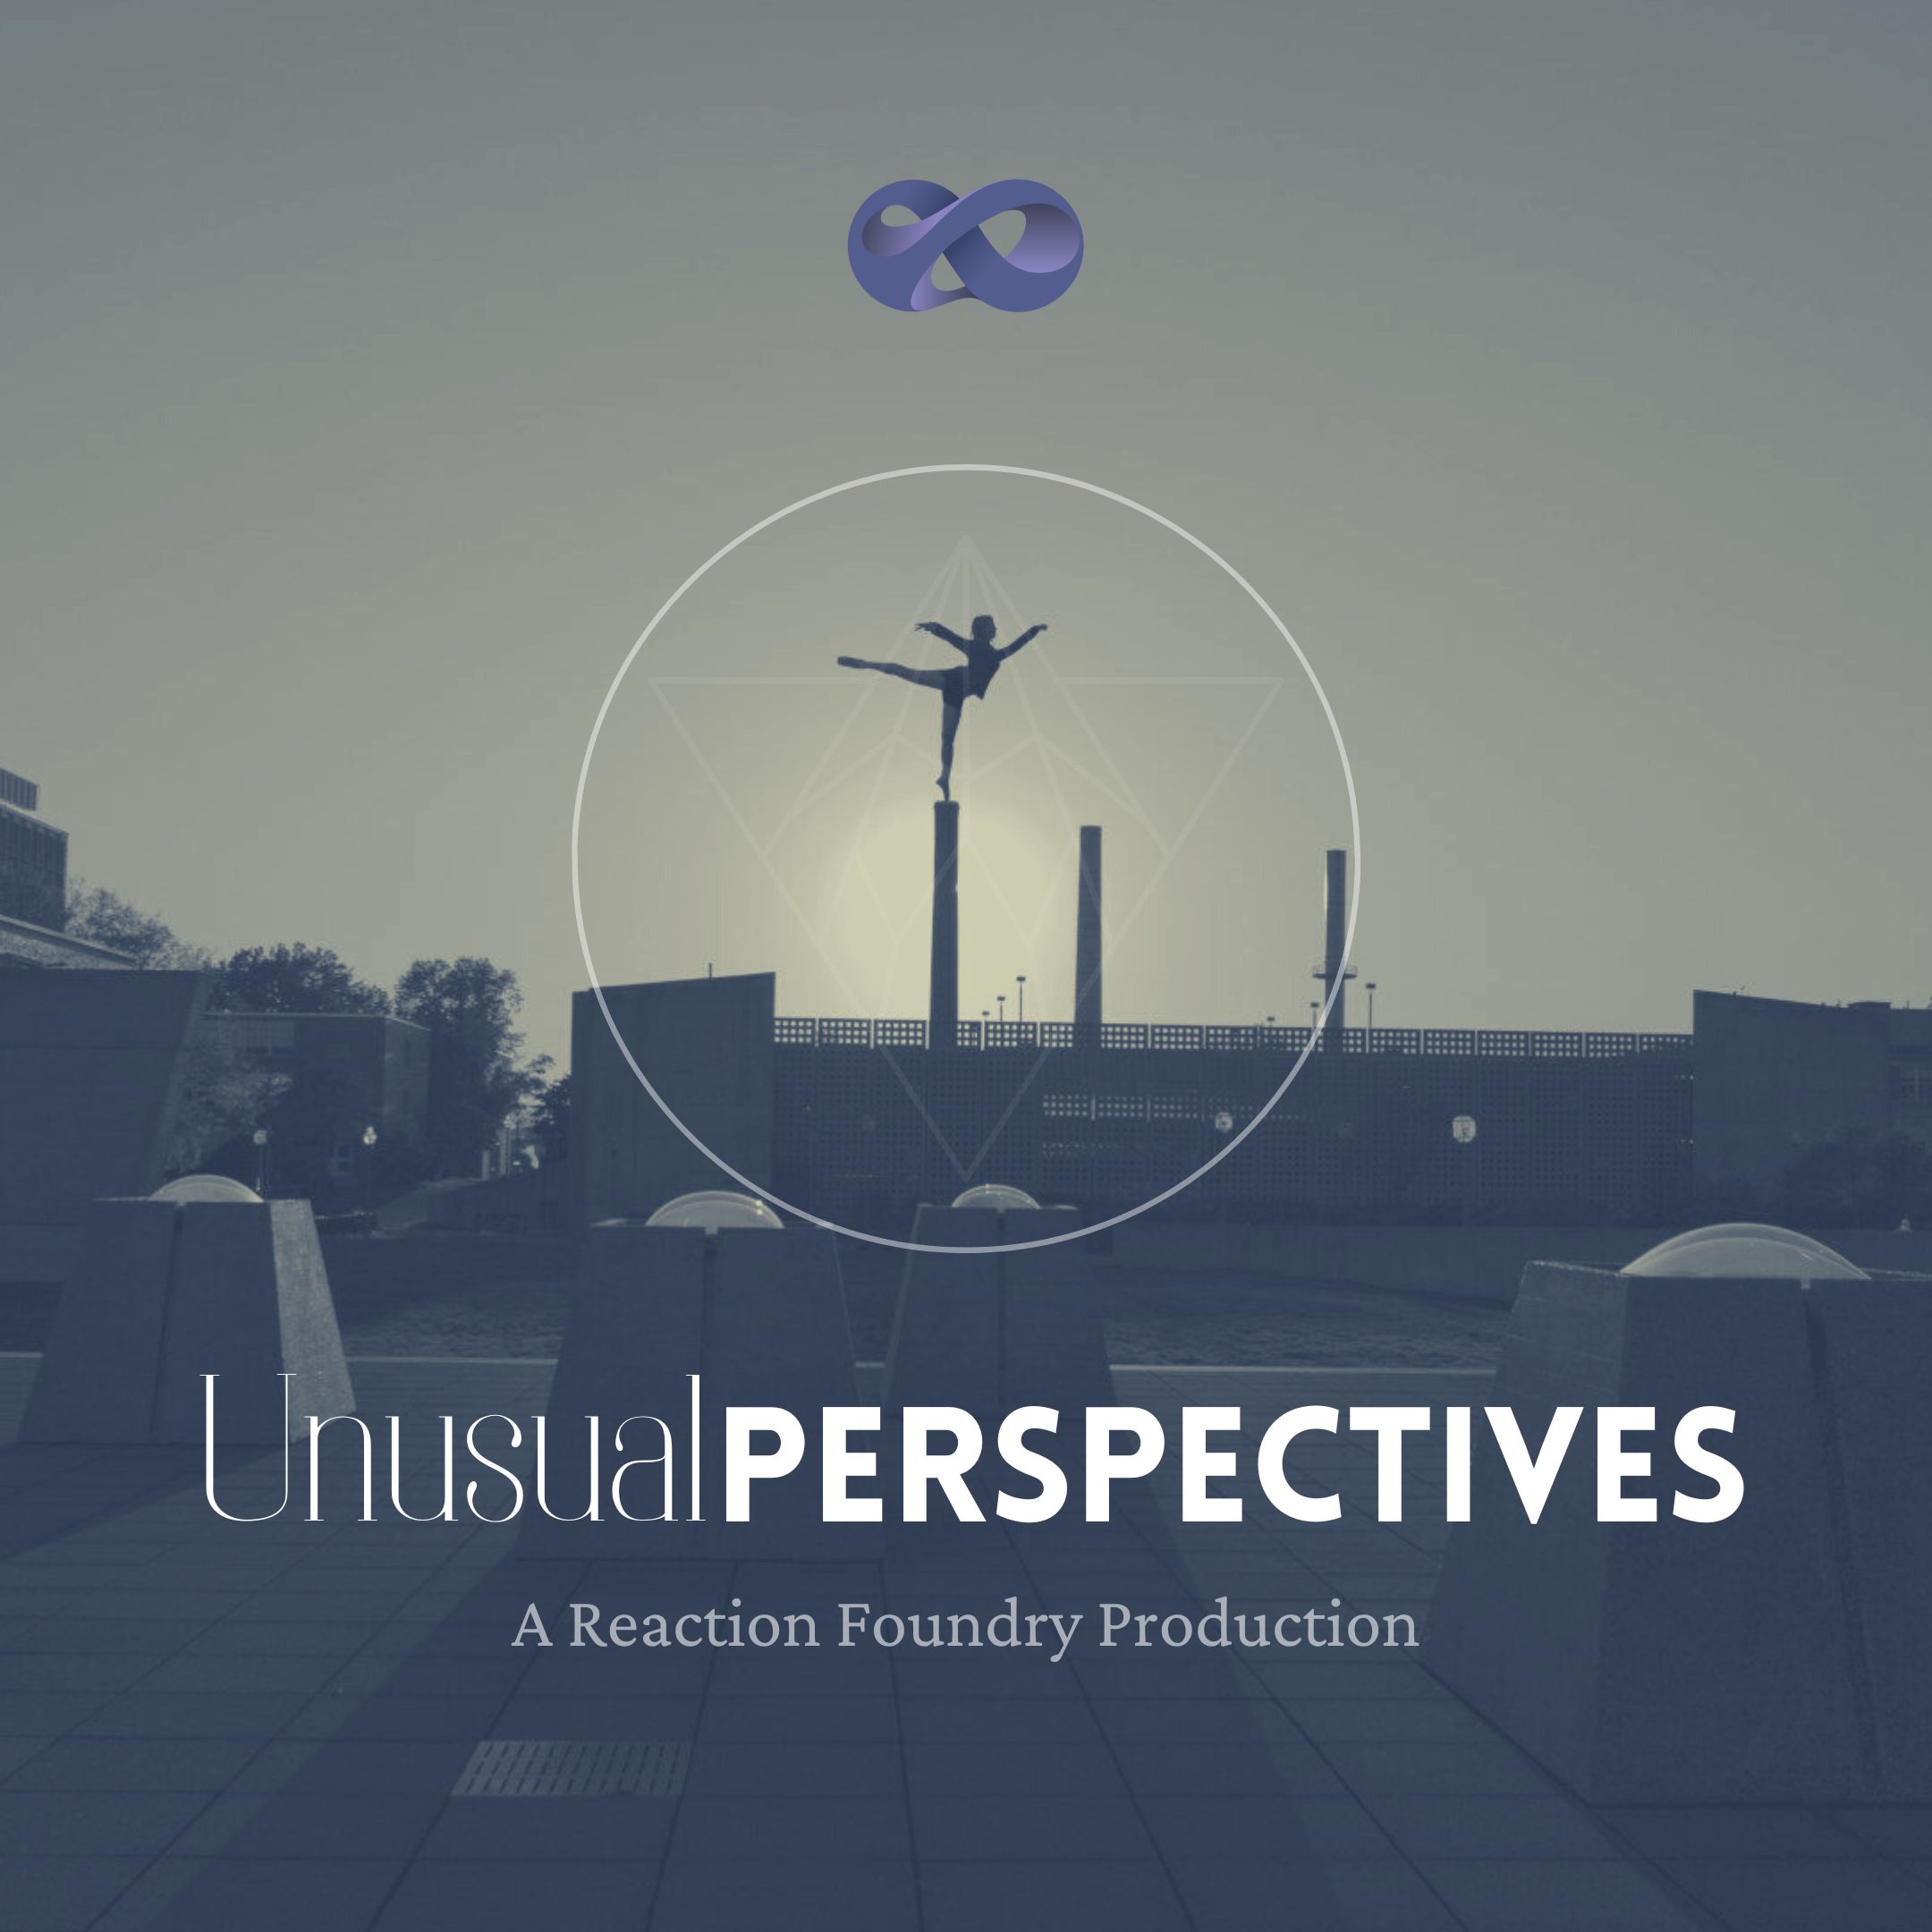 Artwork for Unusual Perspectives